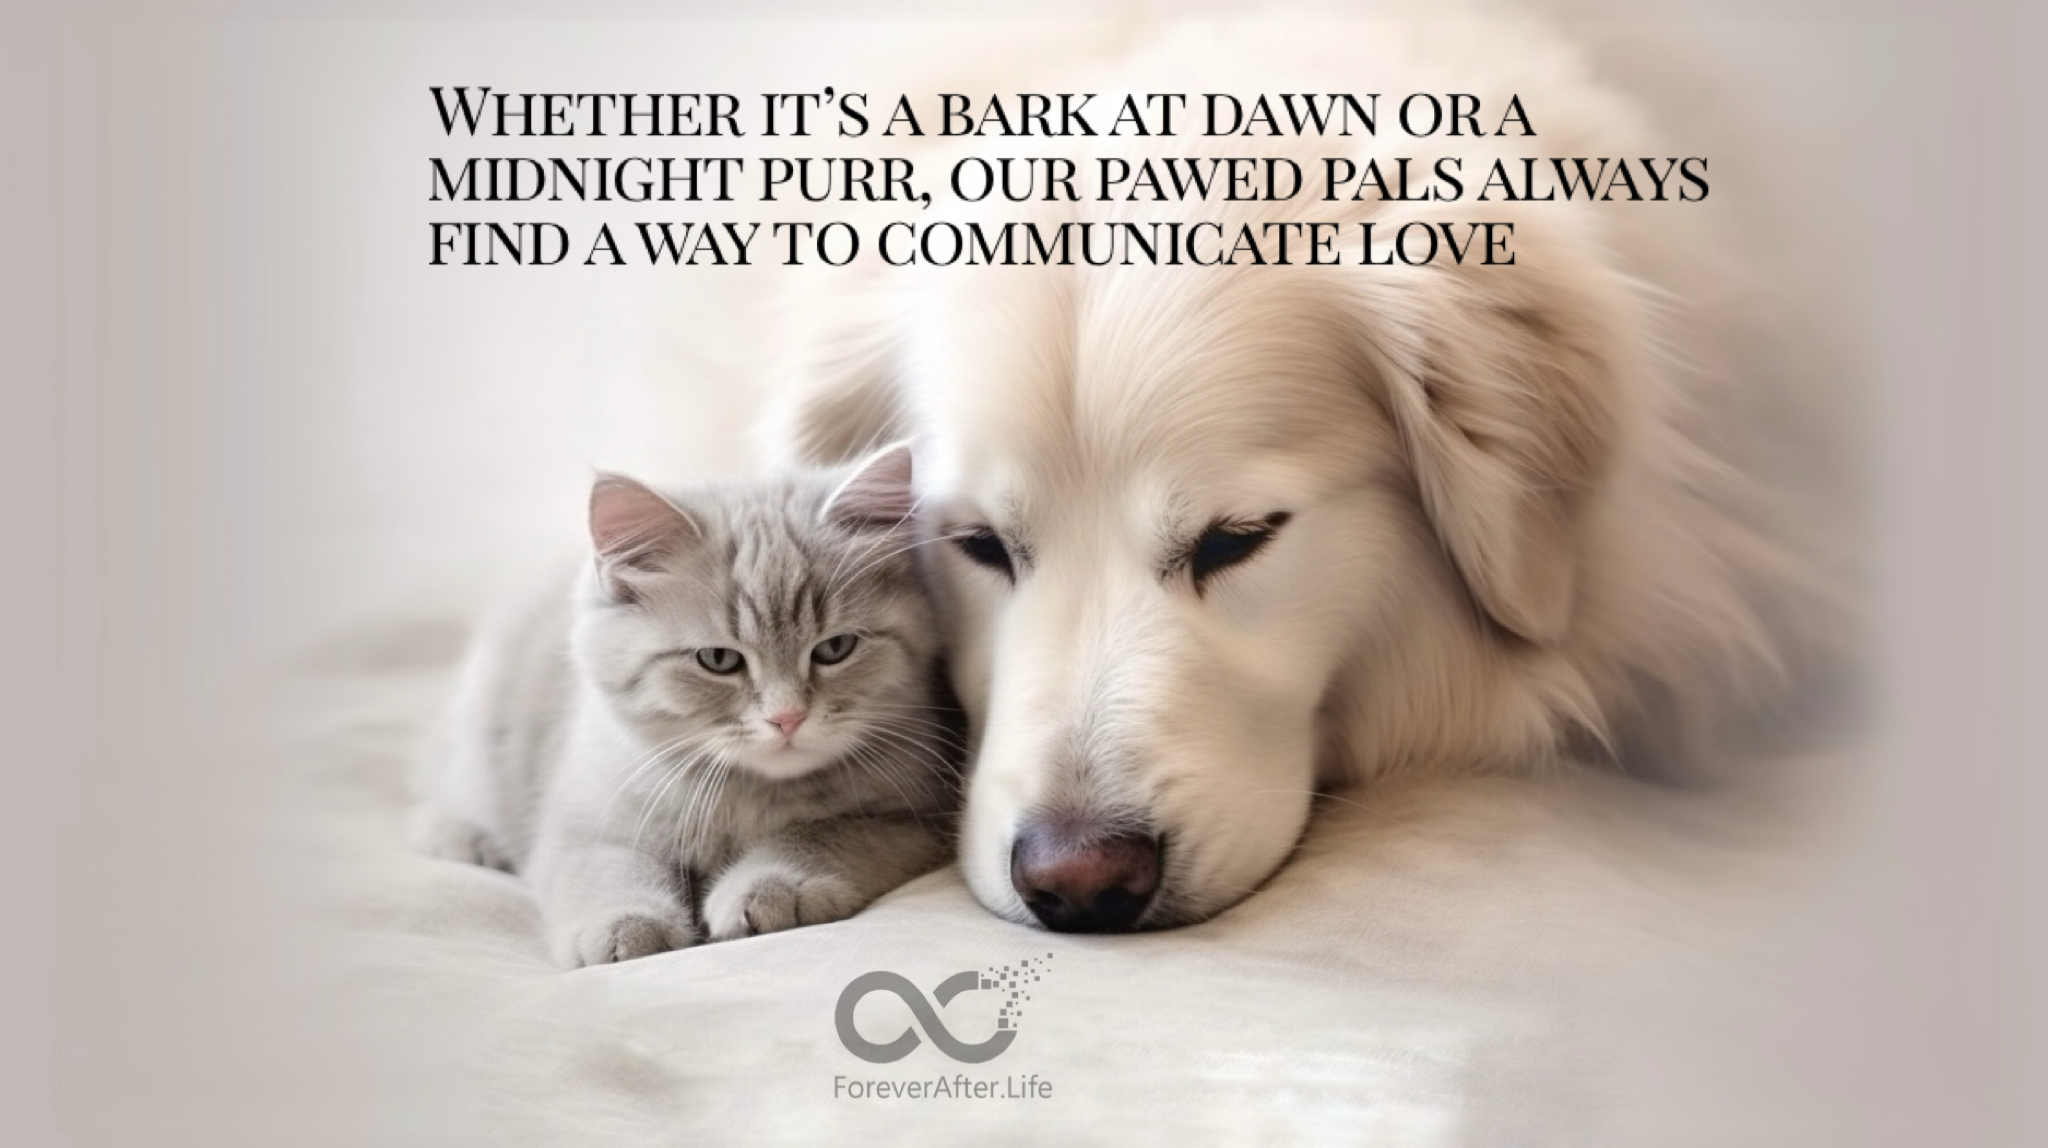 Whether it's a bark at dawn or a midnight purr, our pawed pals always find a way to communicate love